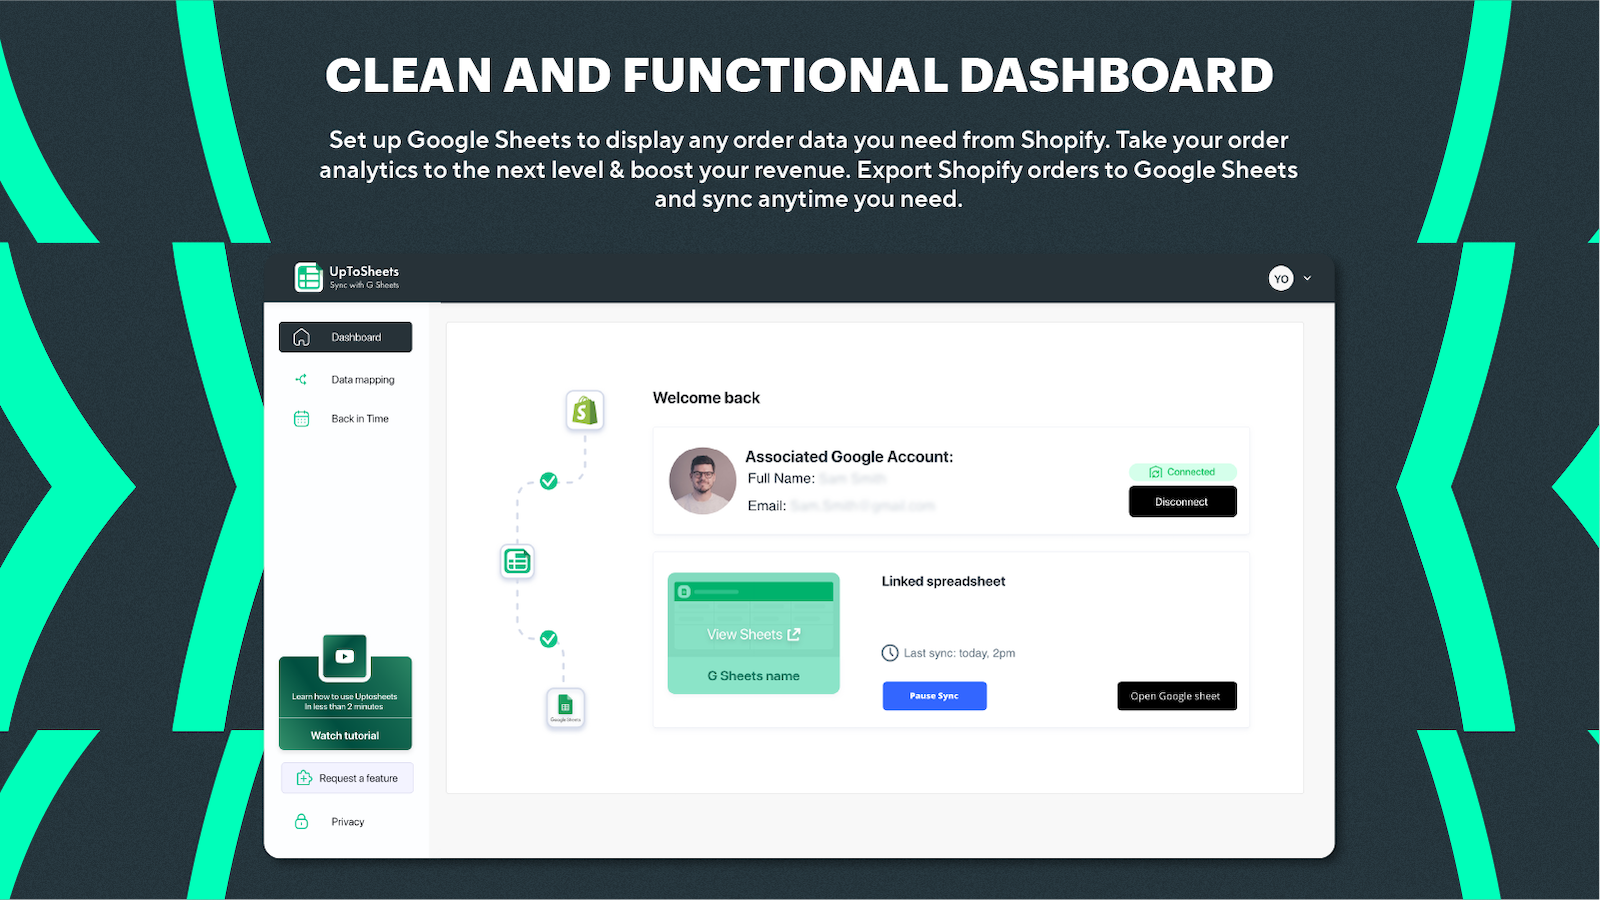 CLEAN AND FUNCTIONAL DASHBOARD